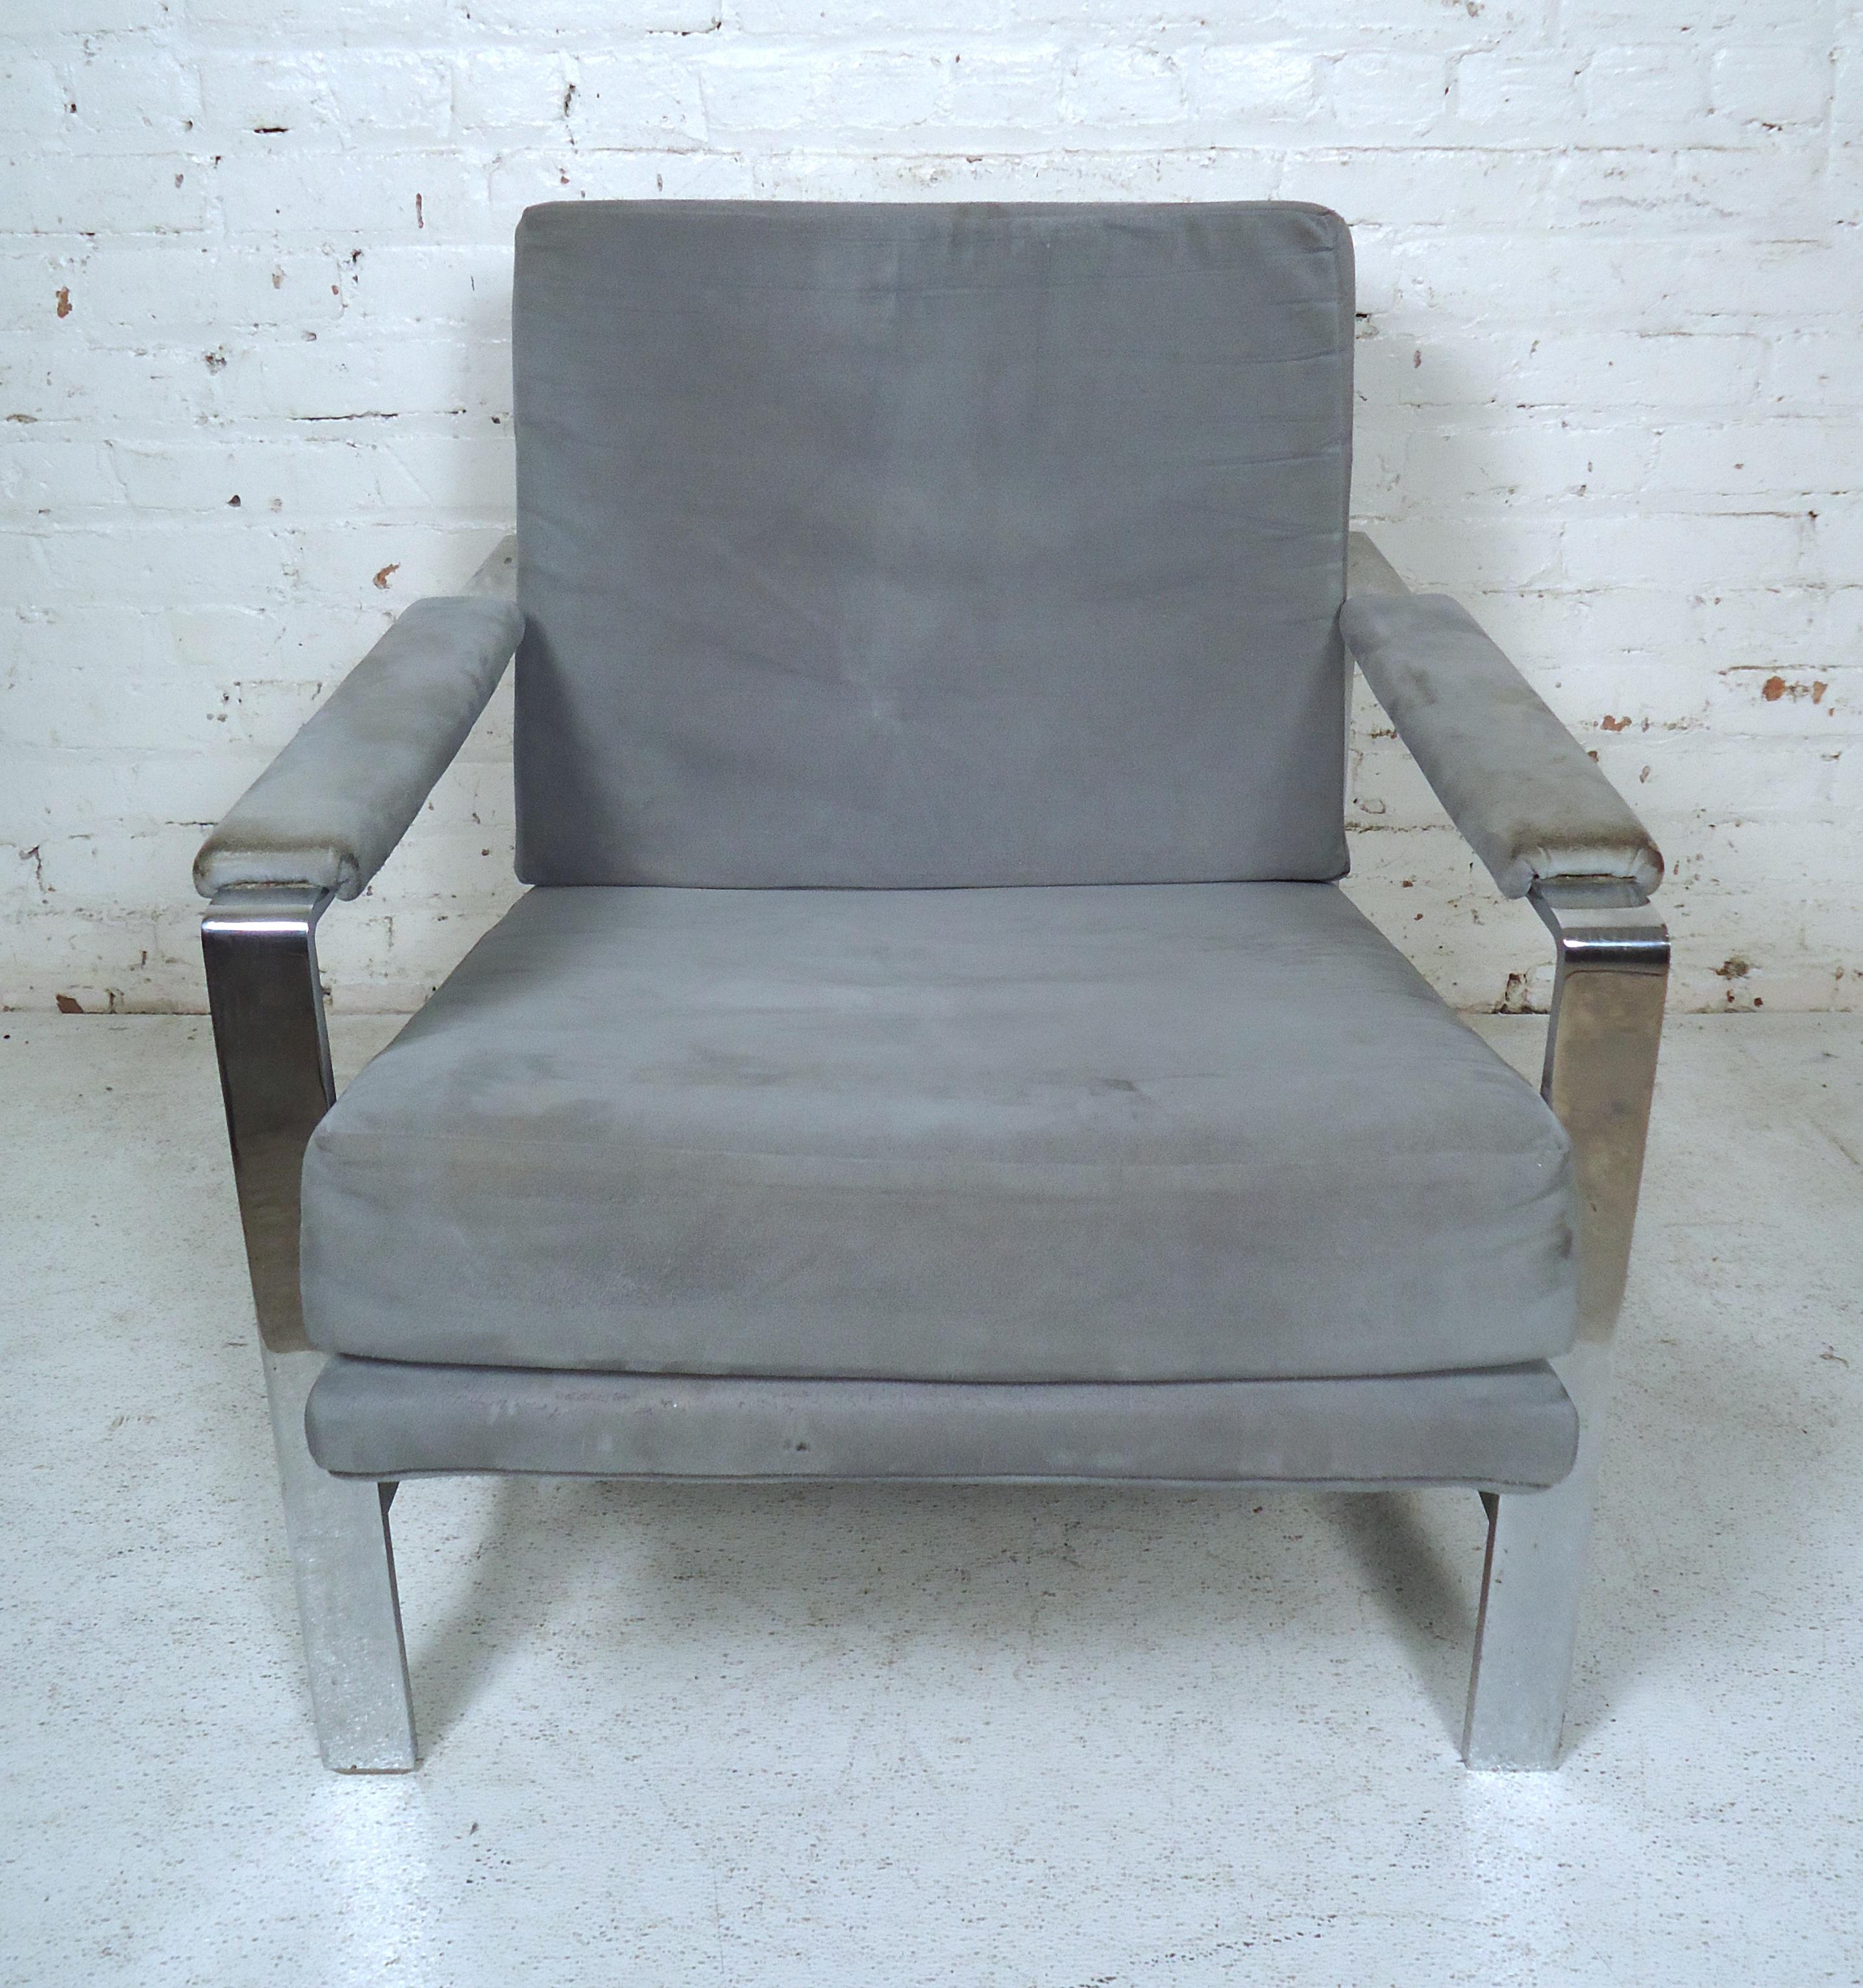 This stunning lightly upholstered Milo Baughman lounge chair features heavy flat bar chrome frames and thick padded cushions and is sure to make a lasting impression in any seating arrangement.

Please confirm item location (NY or NJ).